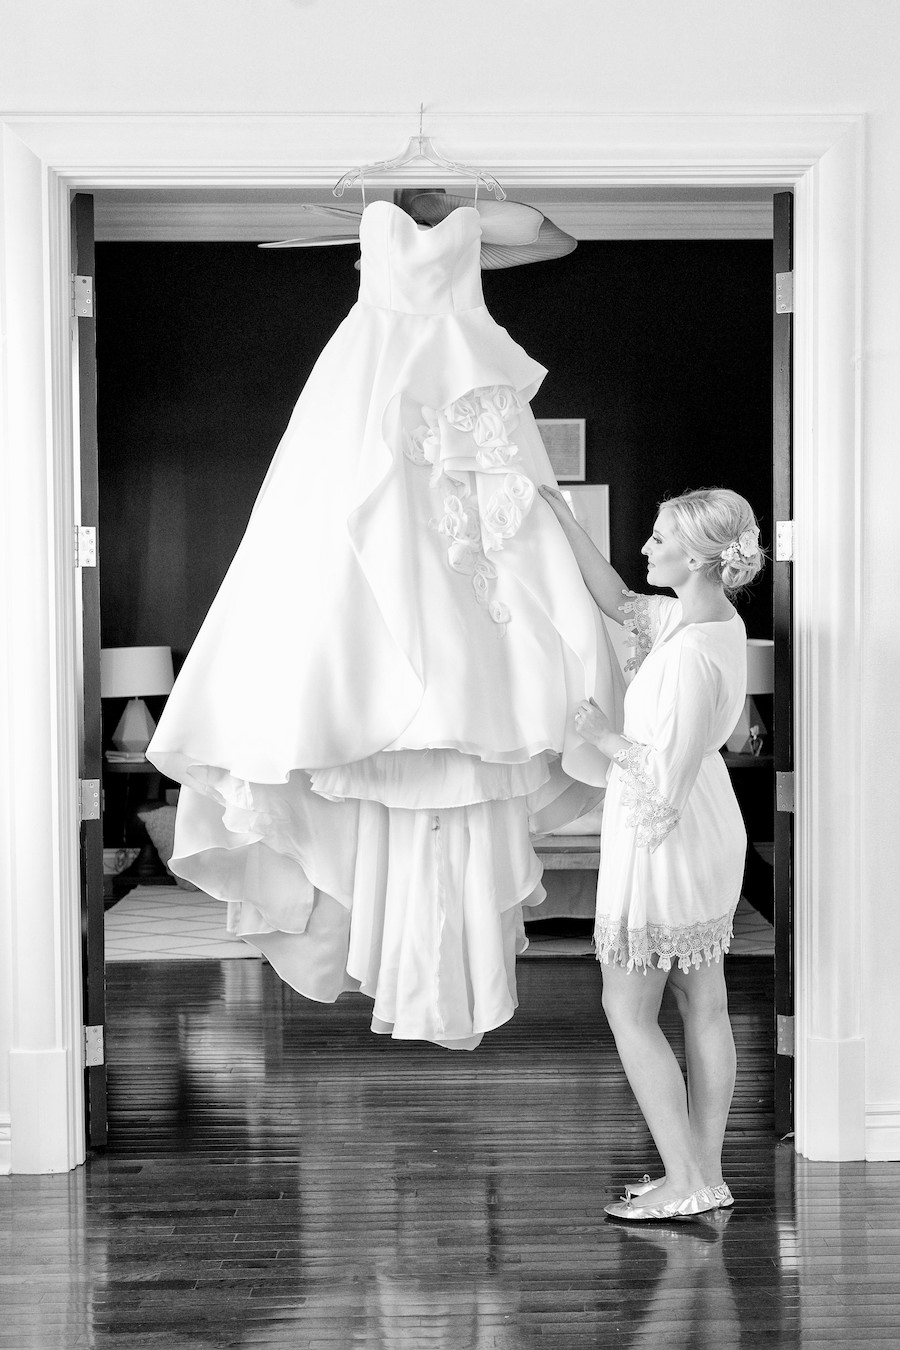 A bride fixing her dress the morning of her wedding